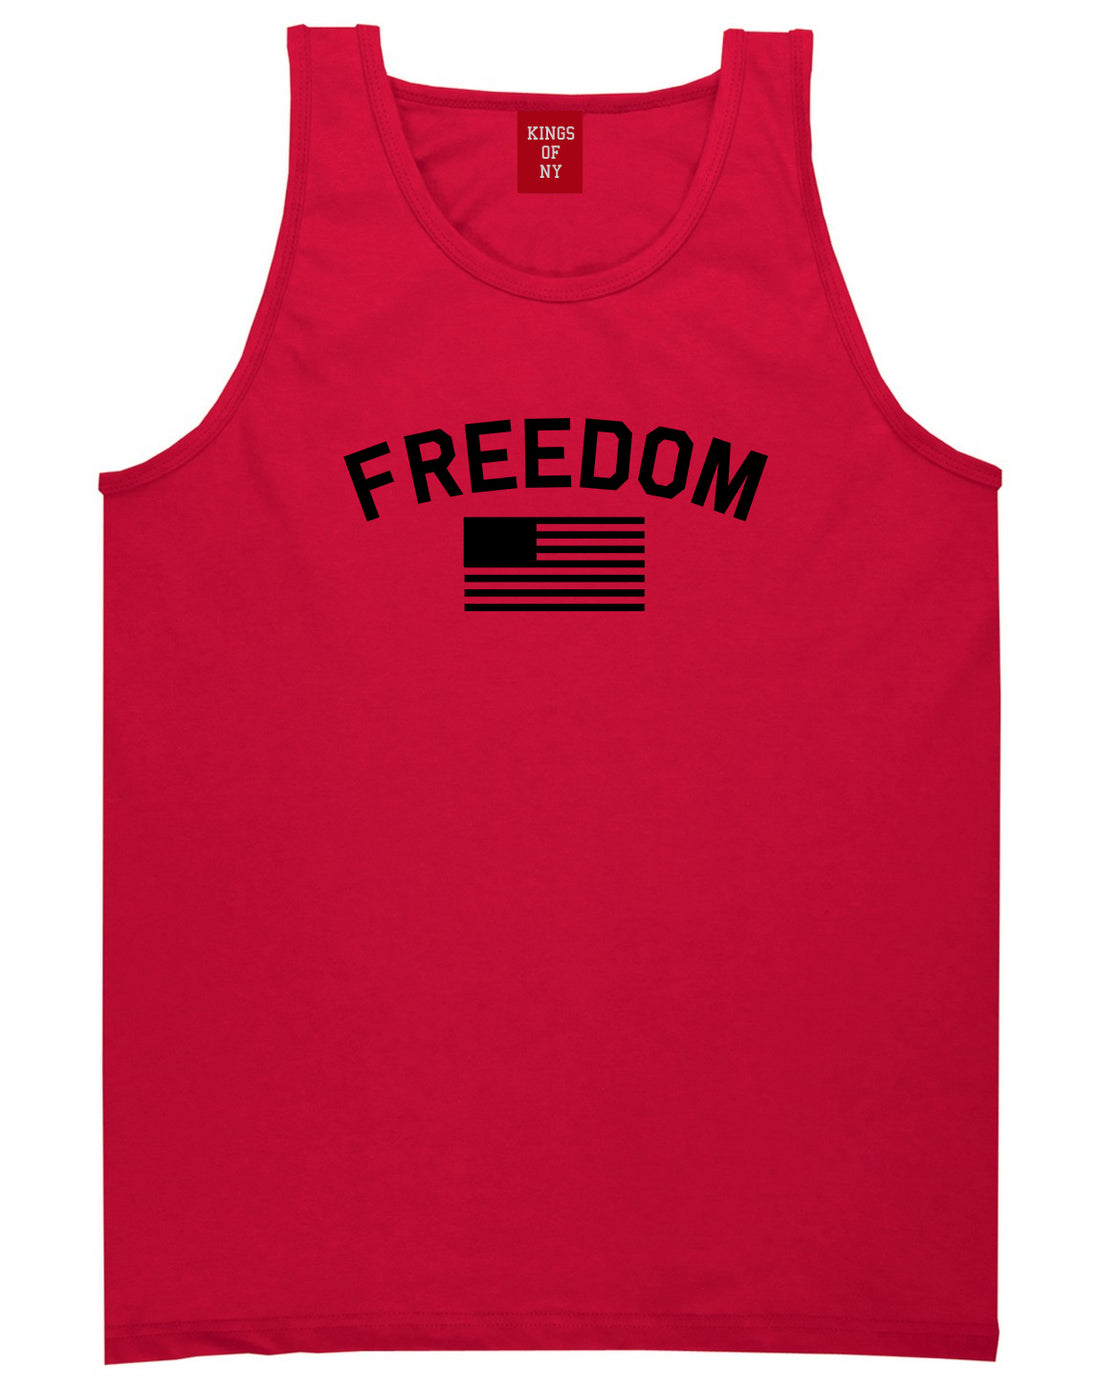 Freedom Flag Mens Red Tank Top Shirt by KINGS OF NY